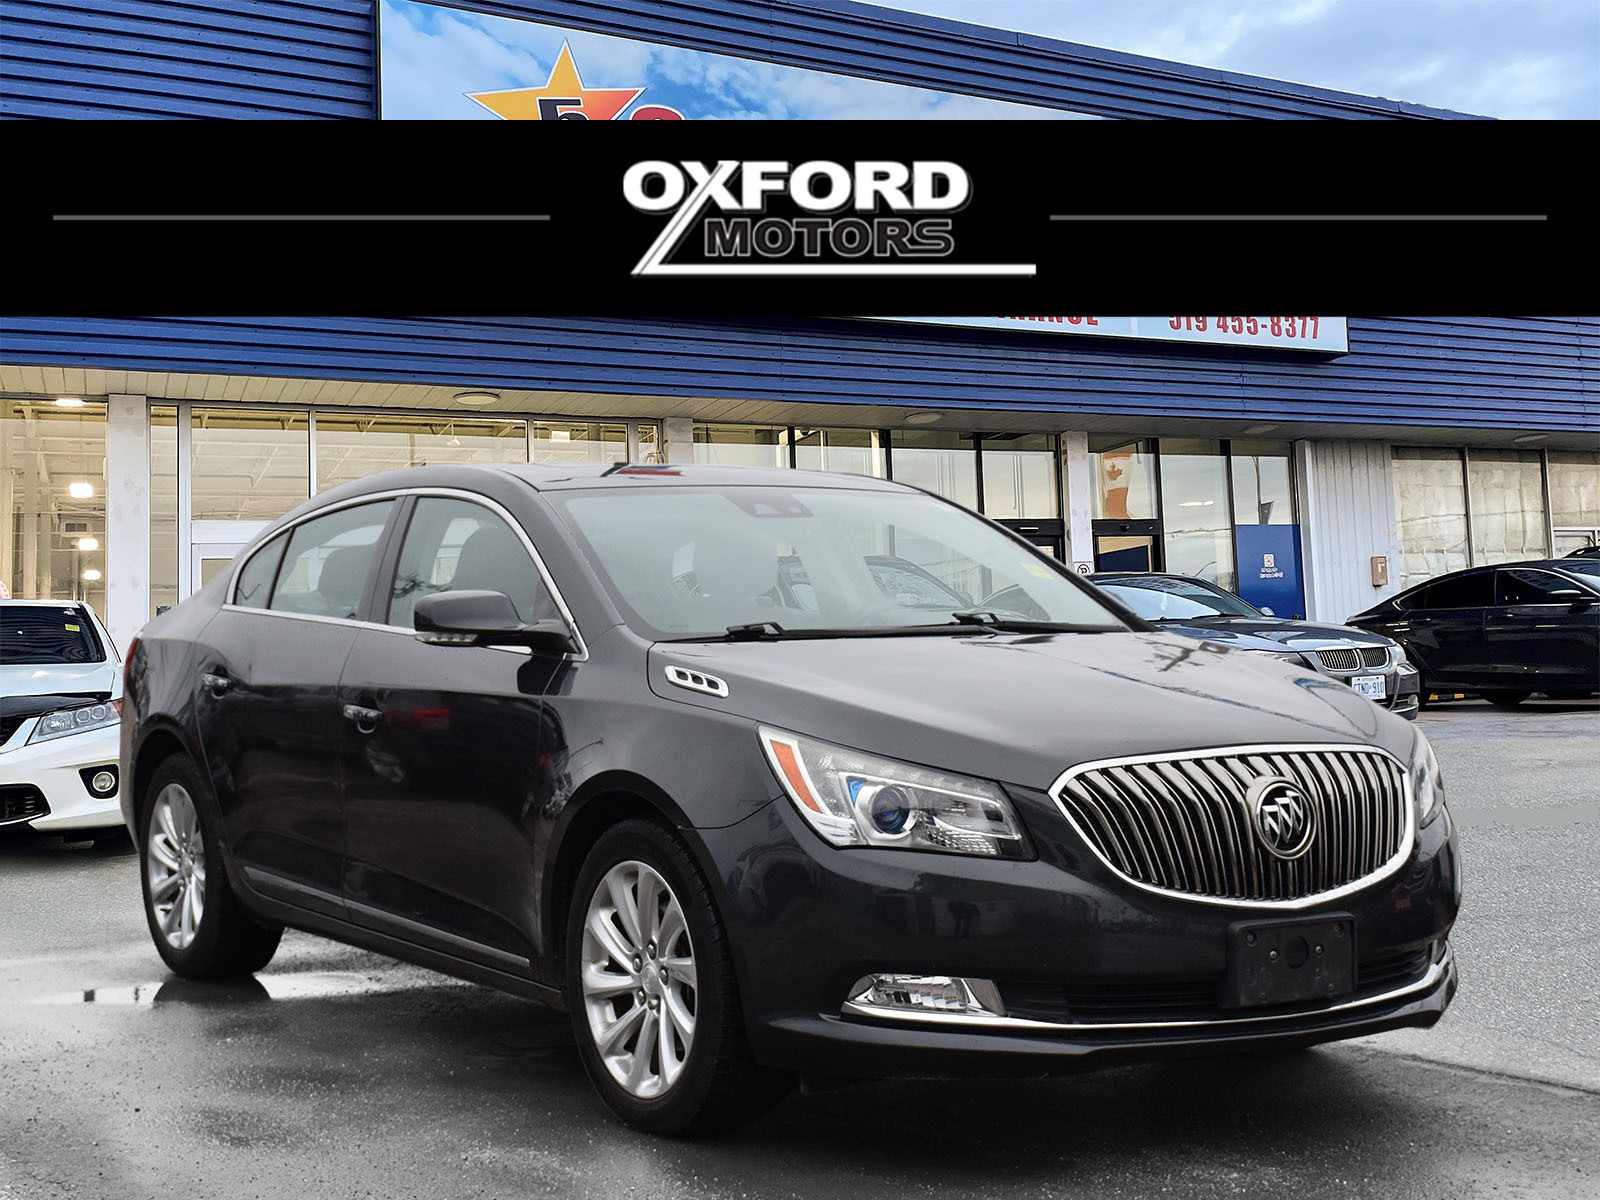 2014 Buick LaCrosse LEATHER NAV SUNROOF P/H-SEATS MINT CONDITION!